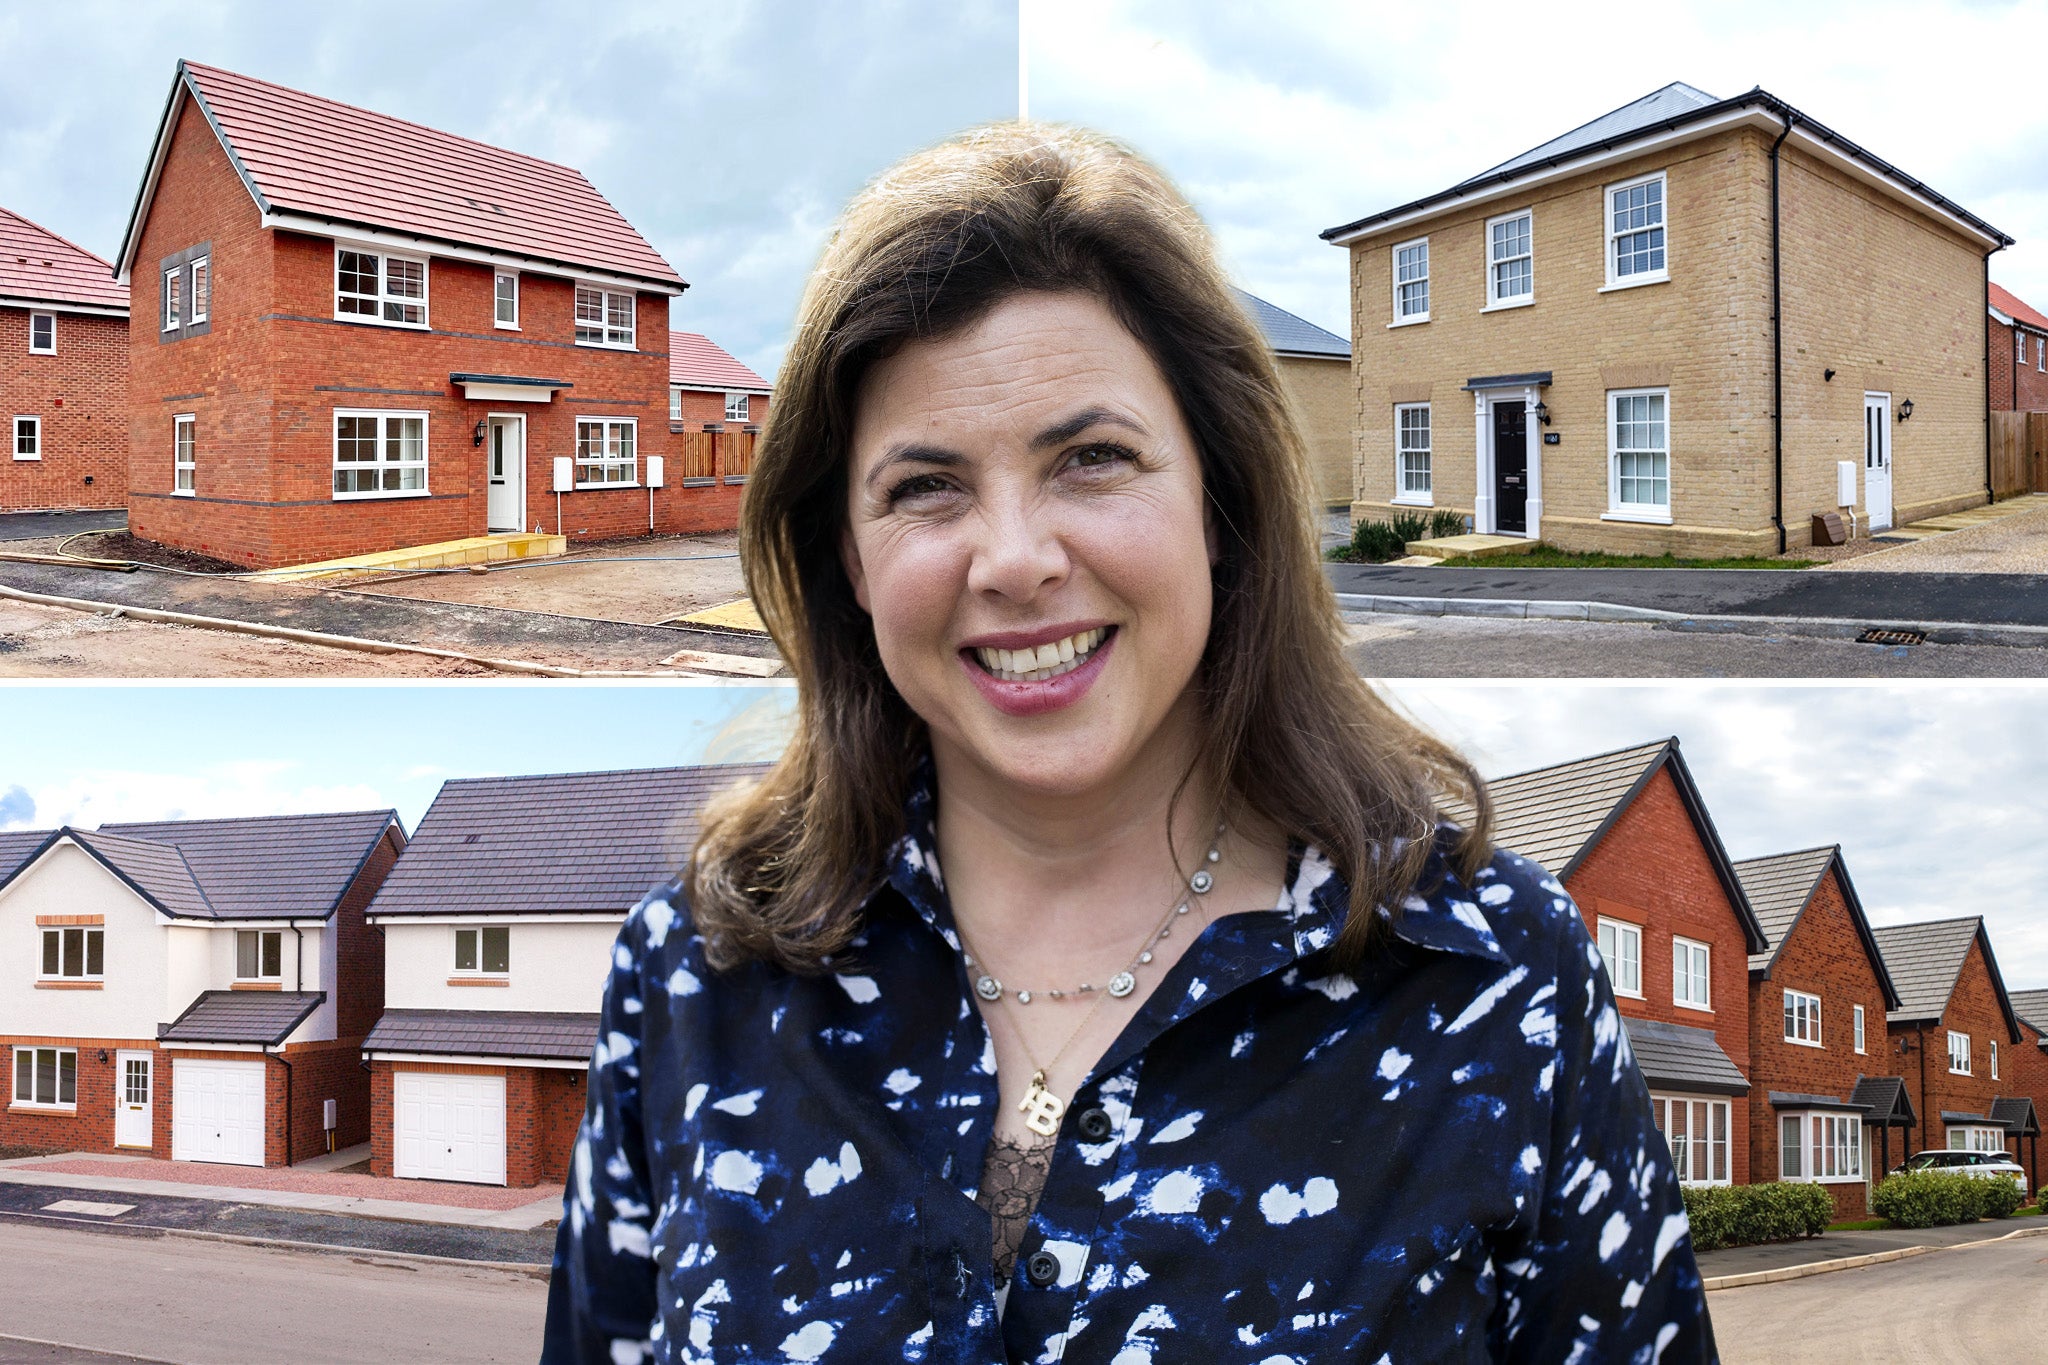 Kirstie Allsopp got into a social media spat for saying it would be better to live in a well built terraced house than a badly built new detached